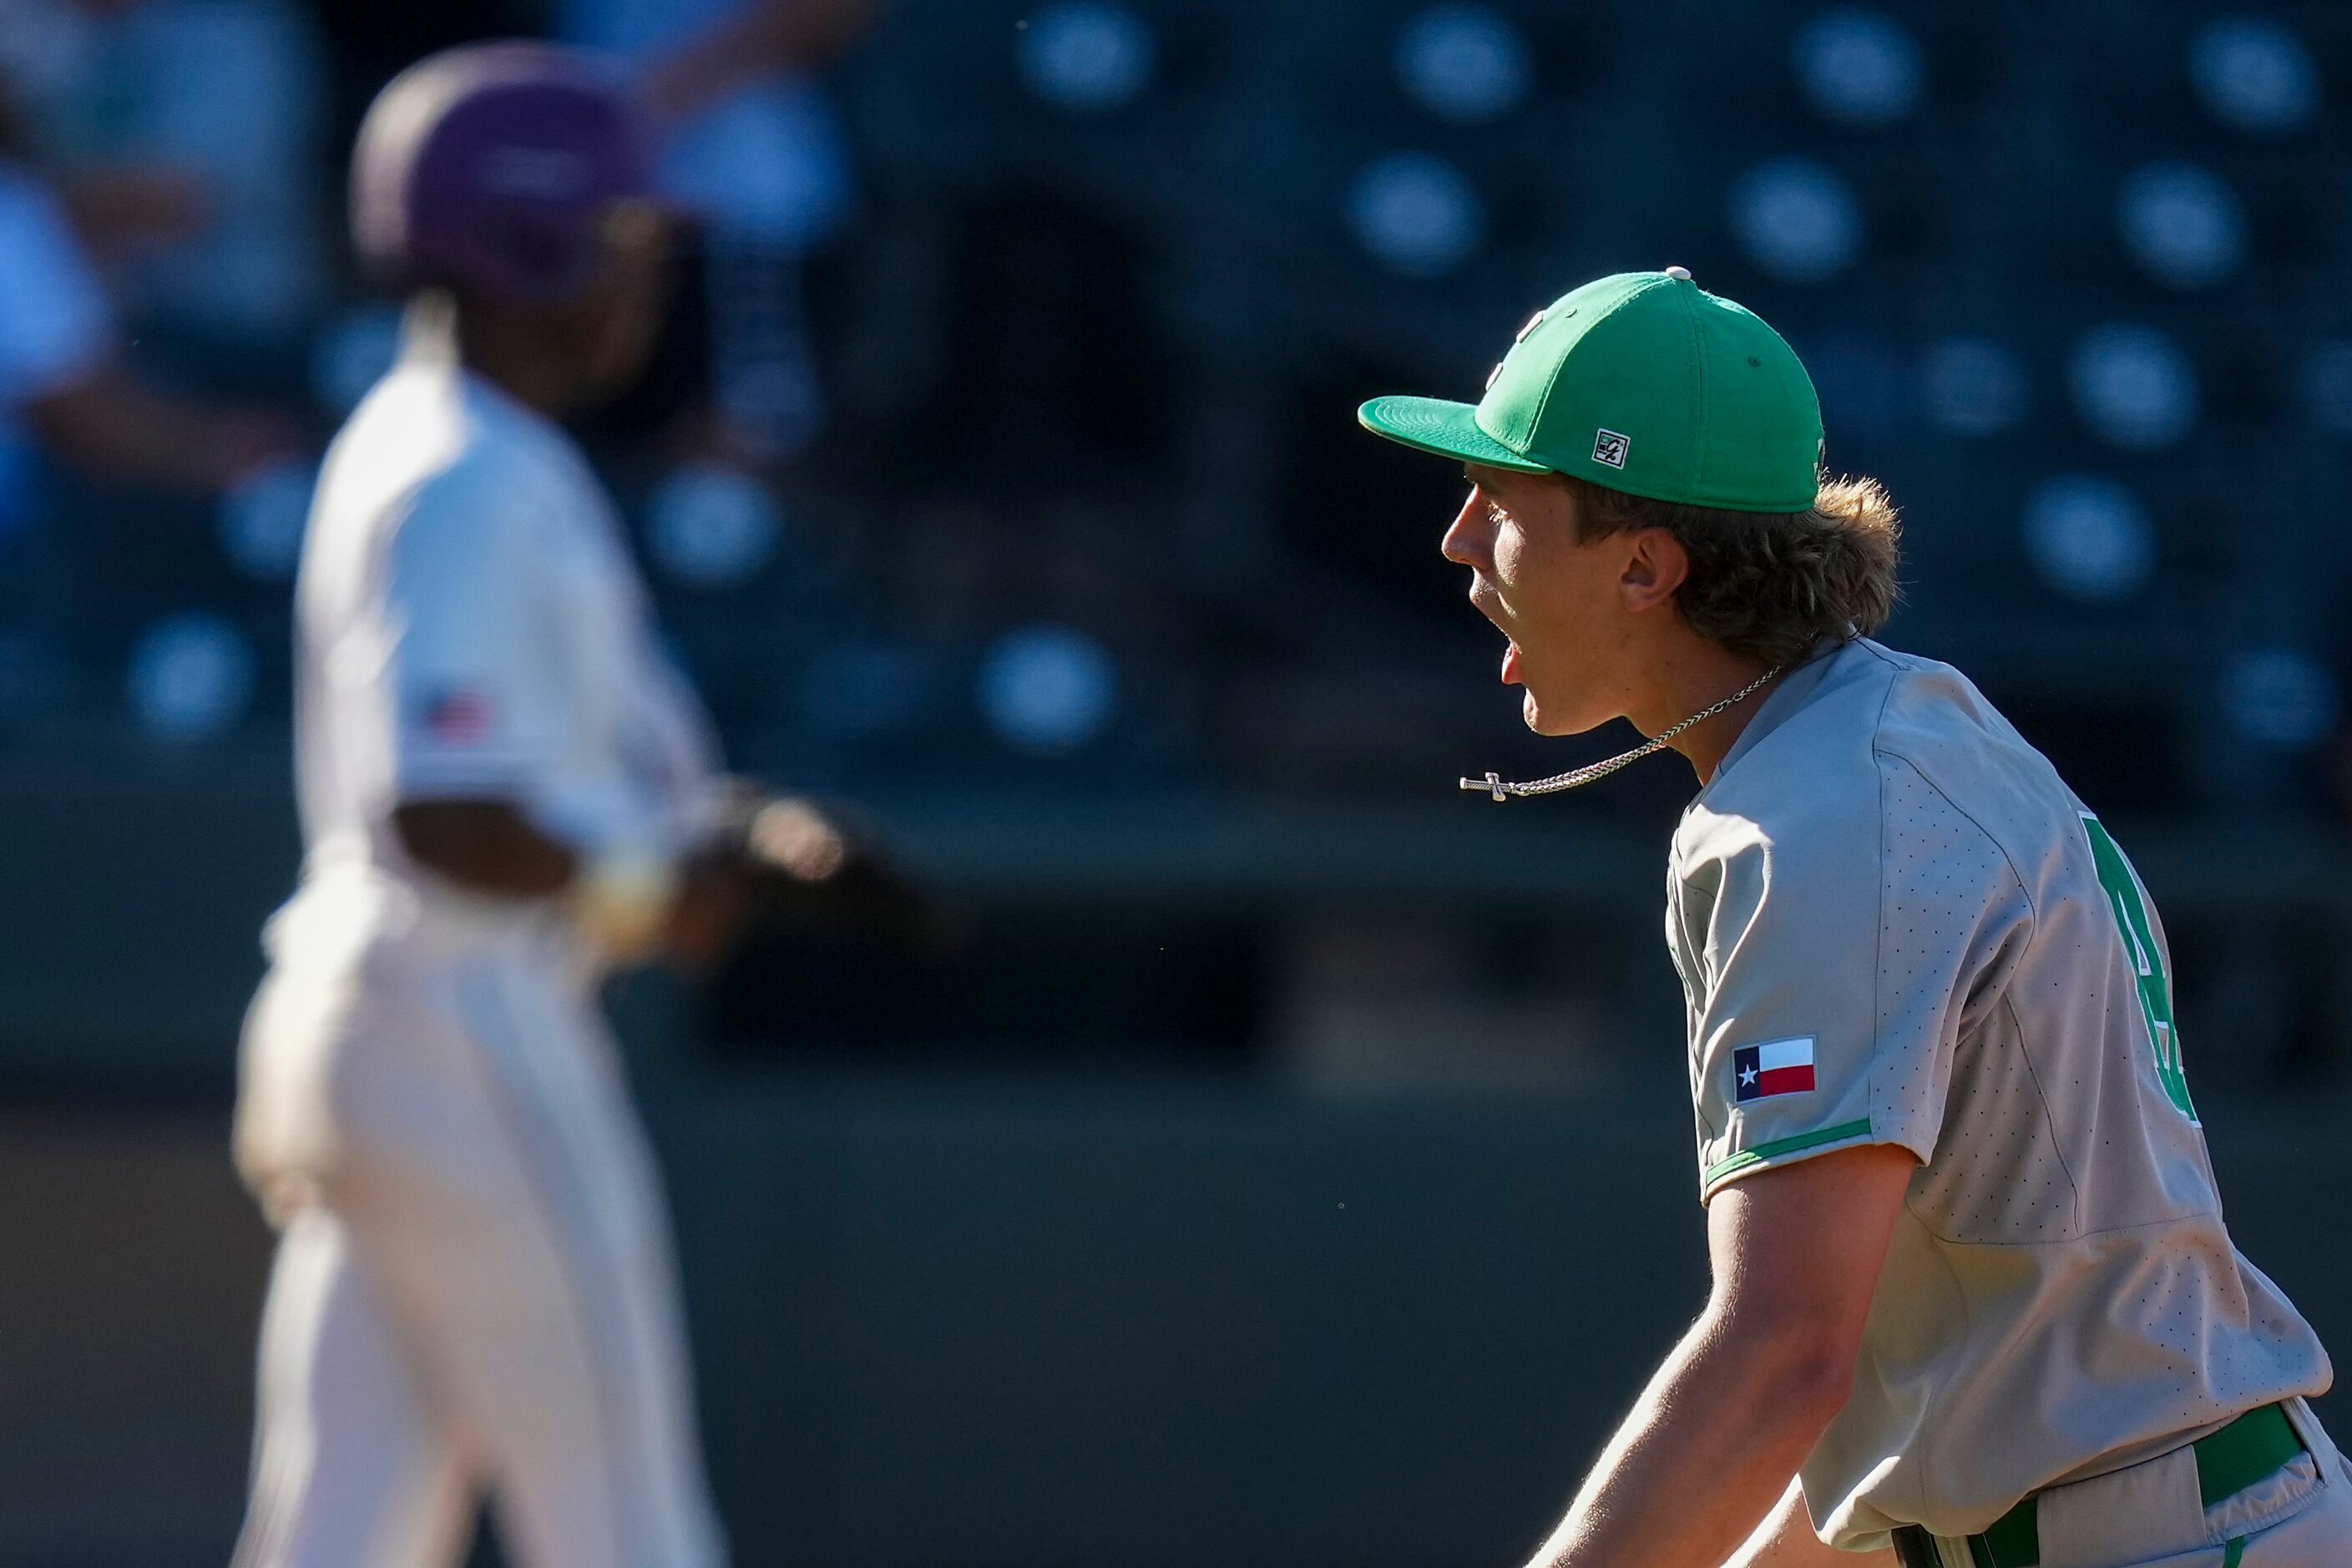 Southlake Carroll pitcher Griffin Herring celebrates after collecting a strikeout to end the...